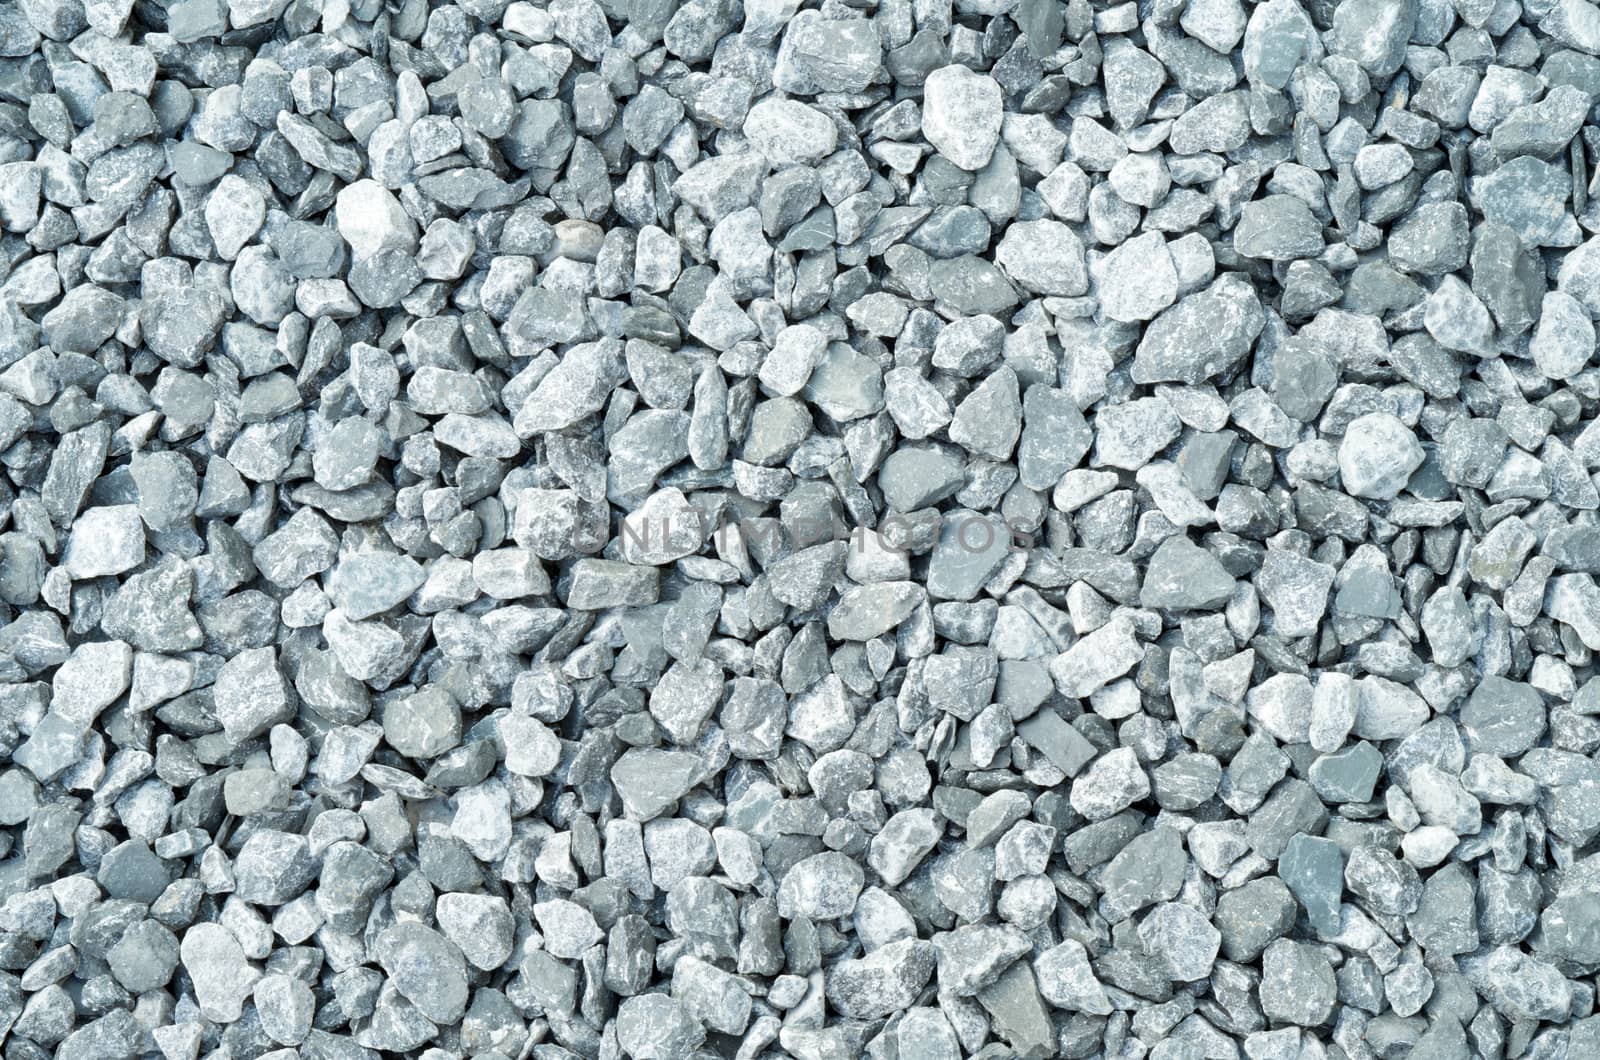 Topw down closeups view of compacted gray gravel